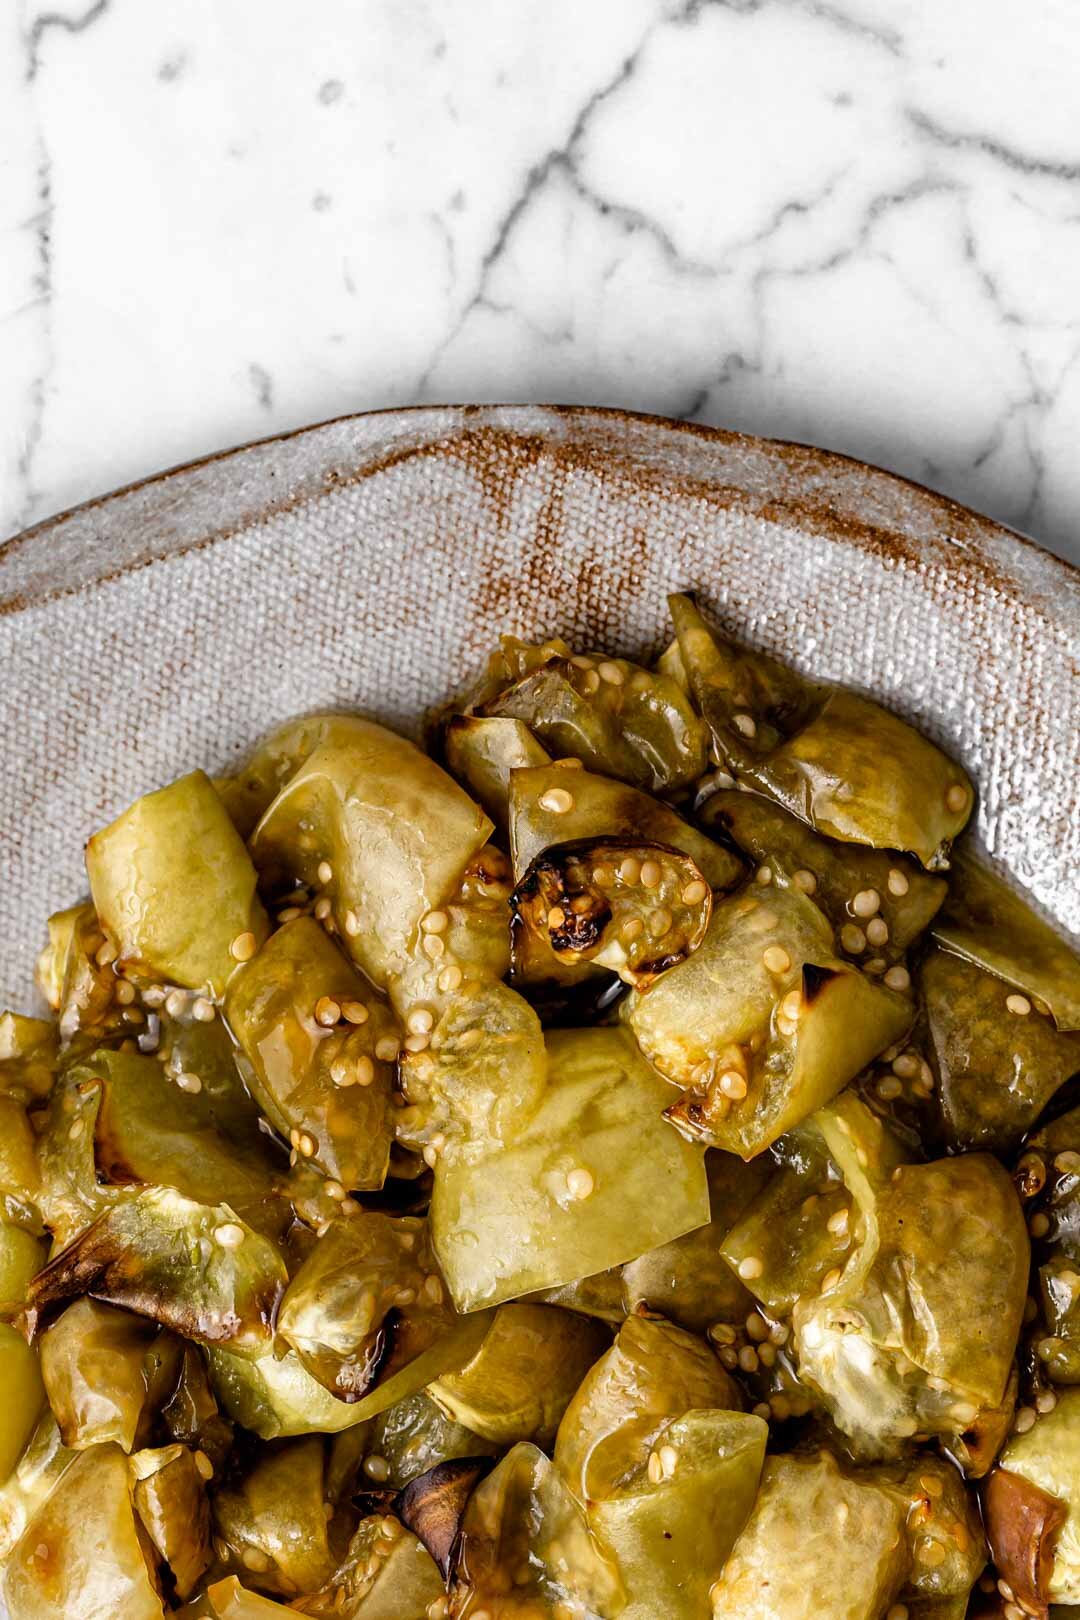 These beautifully golden roasted tomatillos have no oil in the recipe and are so quick and easy to make in the air fryer or oven, adding a beautiful sweet-tart flavor to your dishes, especially bean and potato-based foods. By Beautiful Ingredient.    #tomatillos #tomatillosrecipes #tomatillorecipe #roastedtomatillo #airfryer #tomatillo #airfryerrecipes #vegan #oilfree #oilfreeveganrecipes